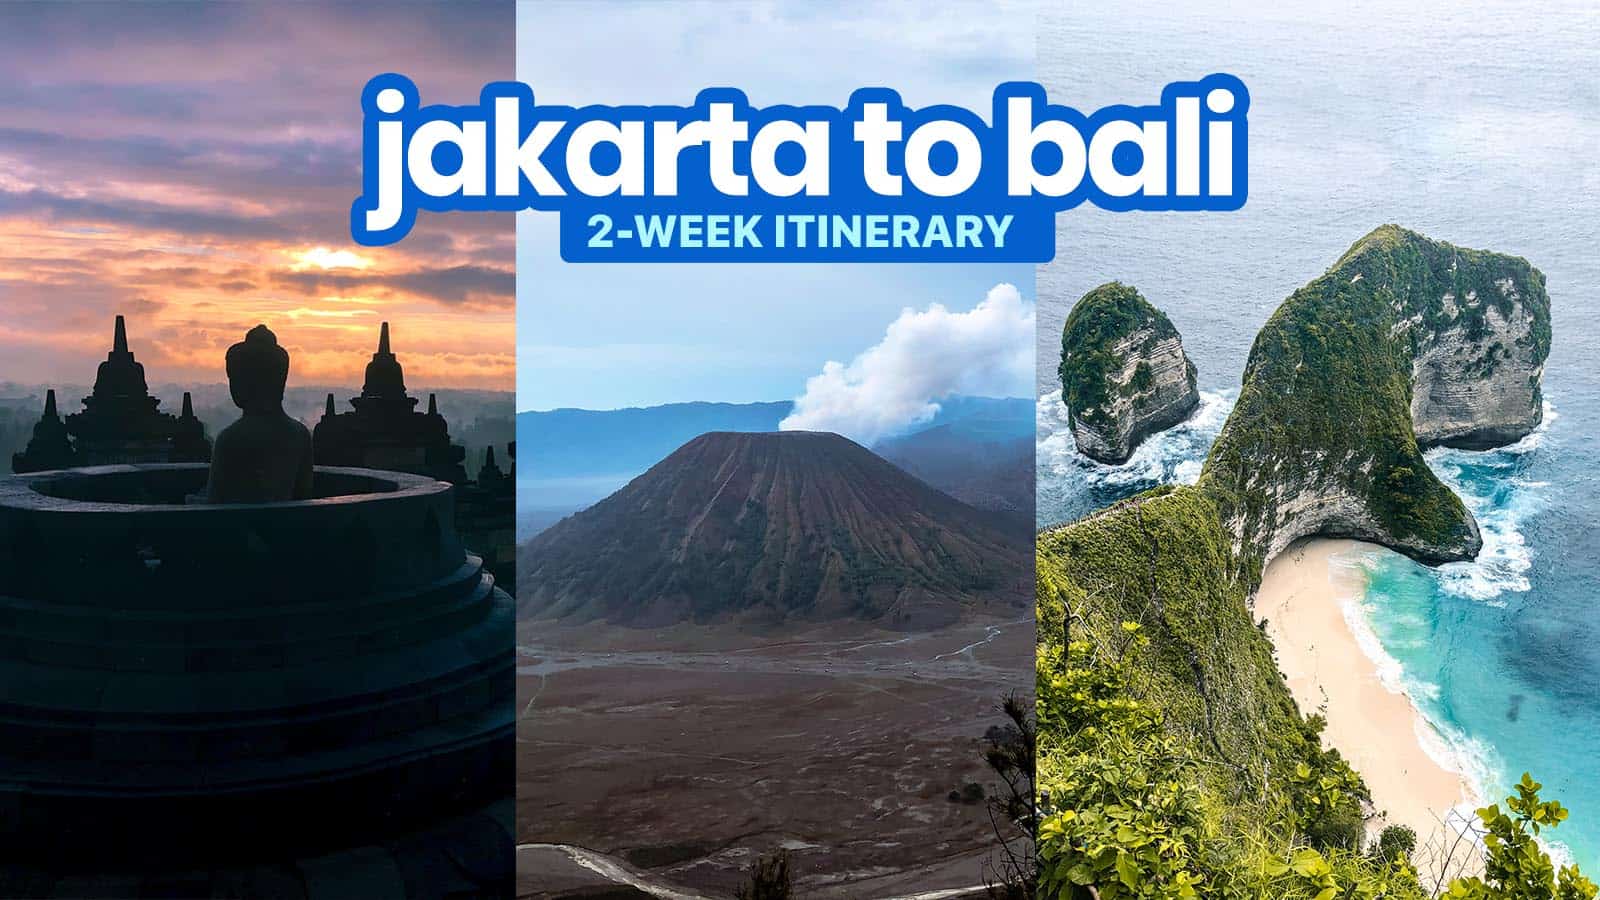 JAKARTA TO BALI: A 2-Week Indonesia Itinerary | The Poor Traveler